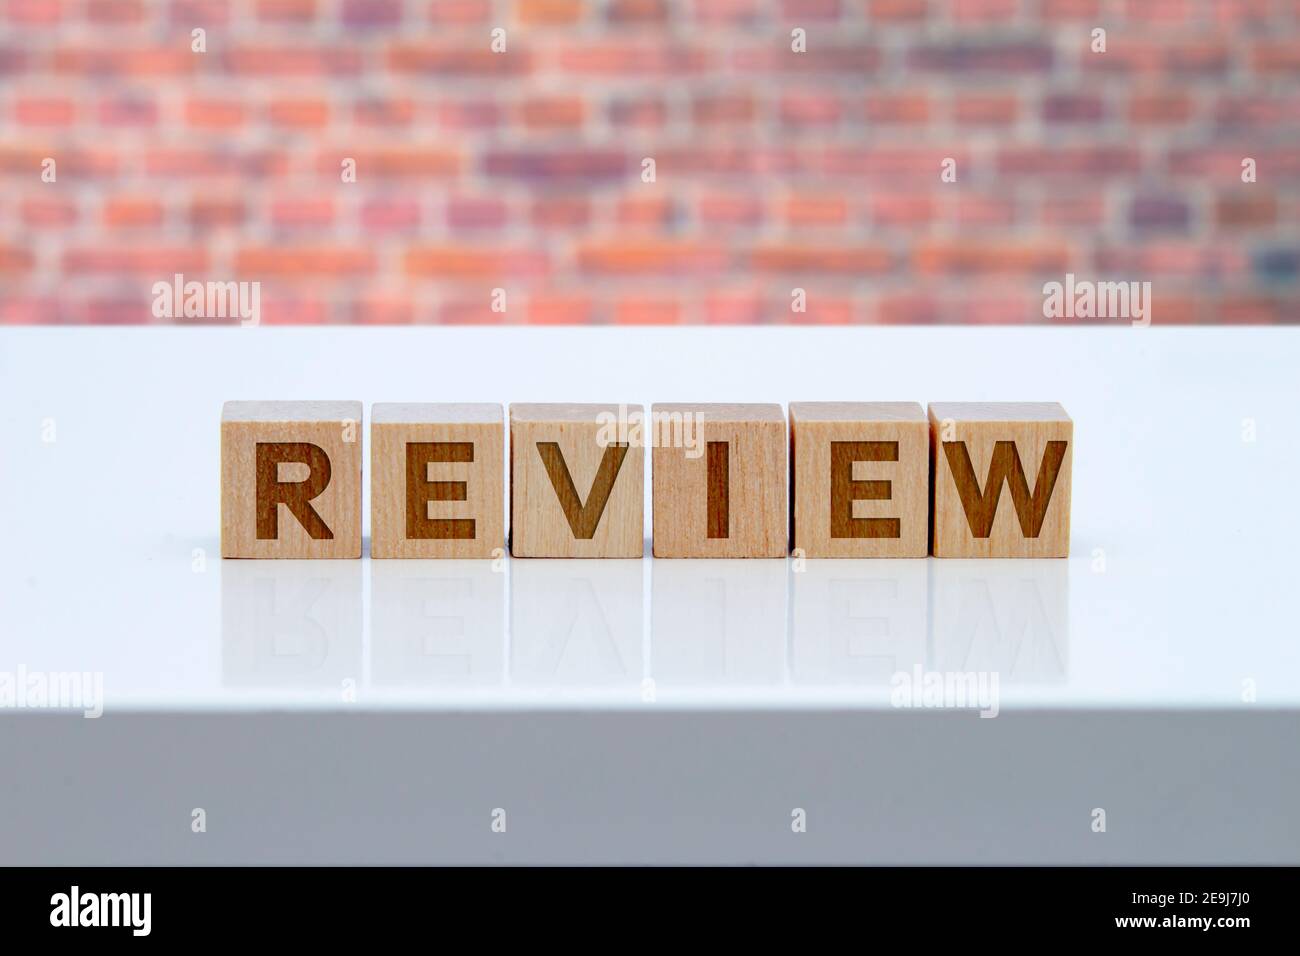 'Review' message sign on wooden blocks sitting on a white table with brink wall on the background. Stock Photo